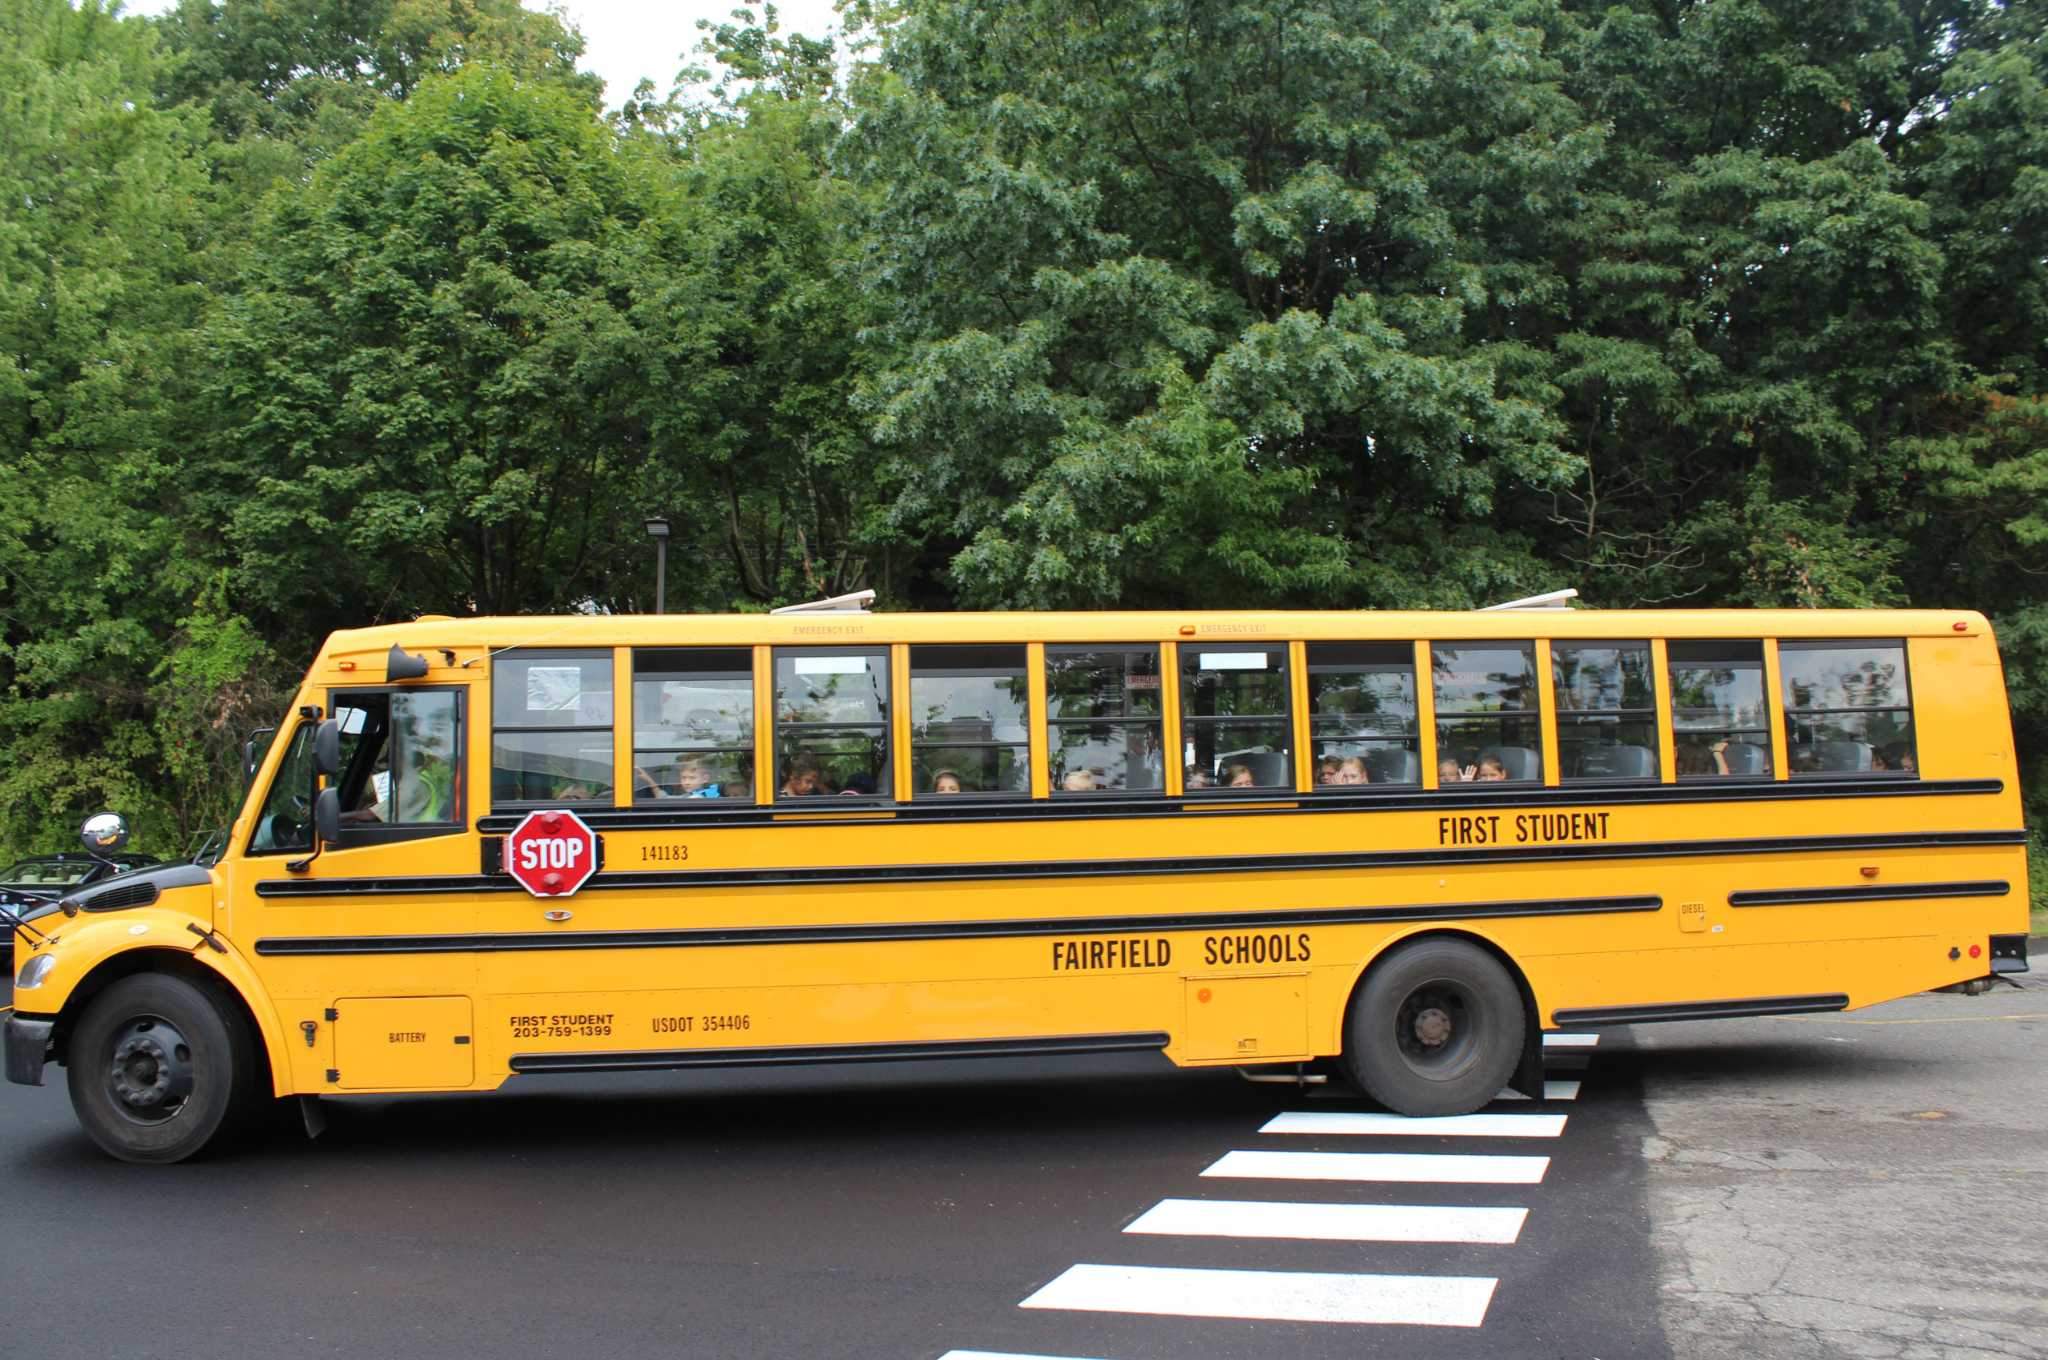 LAWLOR School buses are yellow in North America, Fairfield